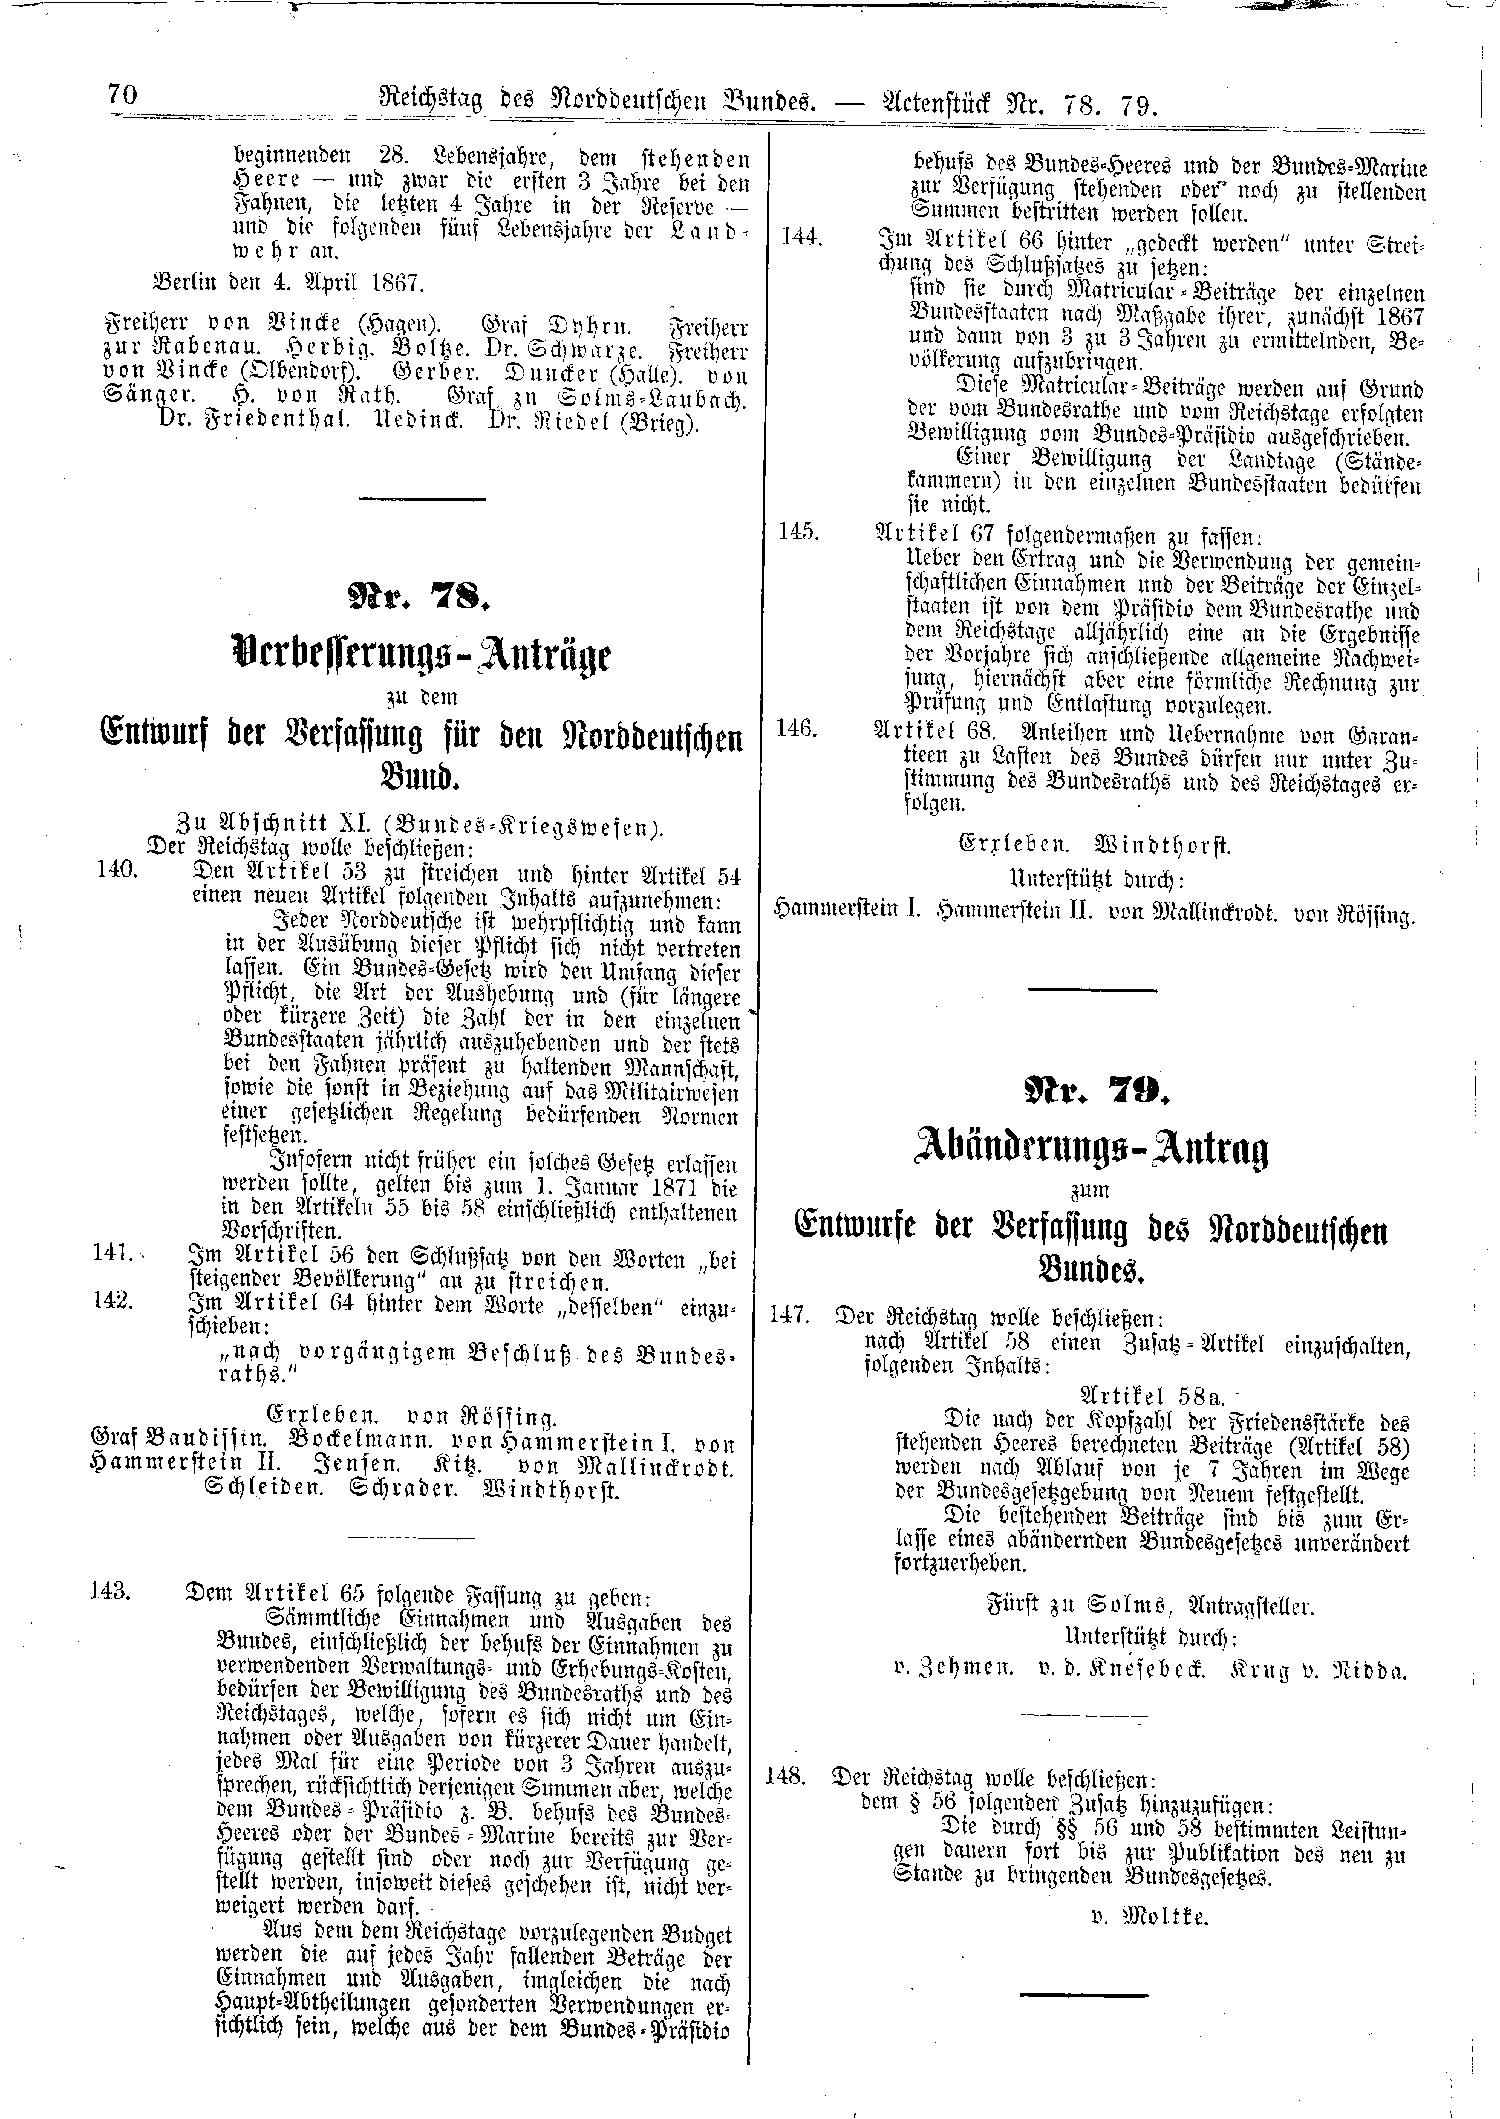 Scan of page 70